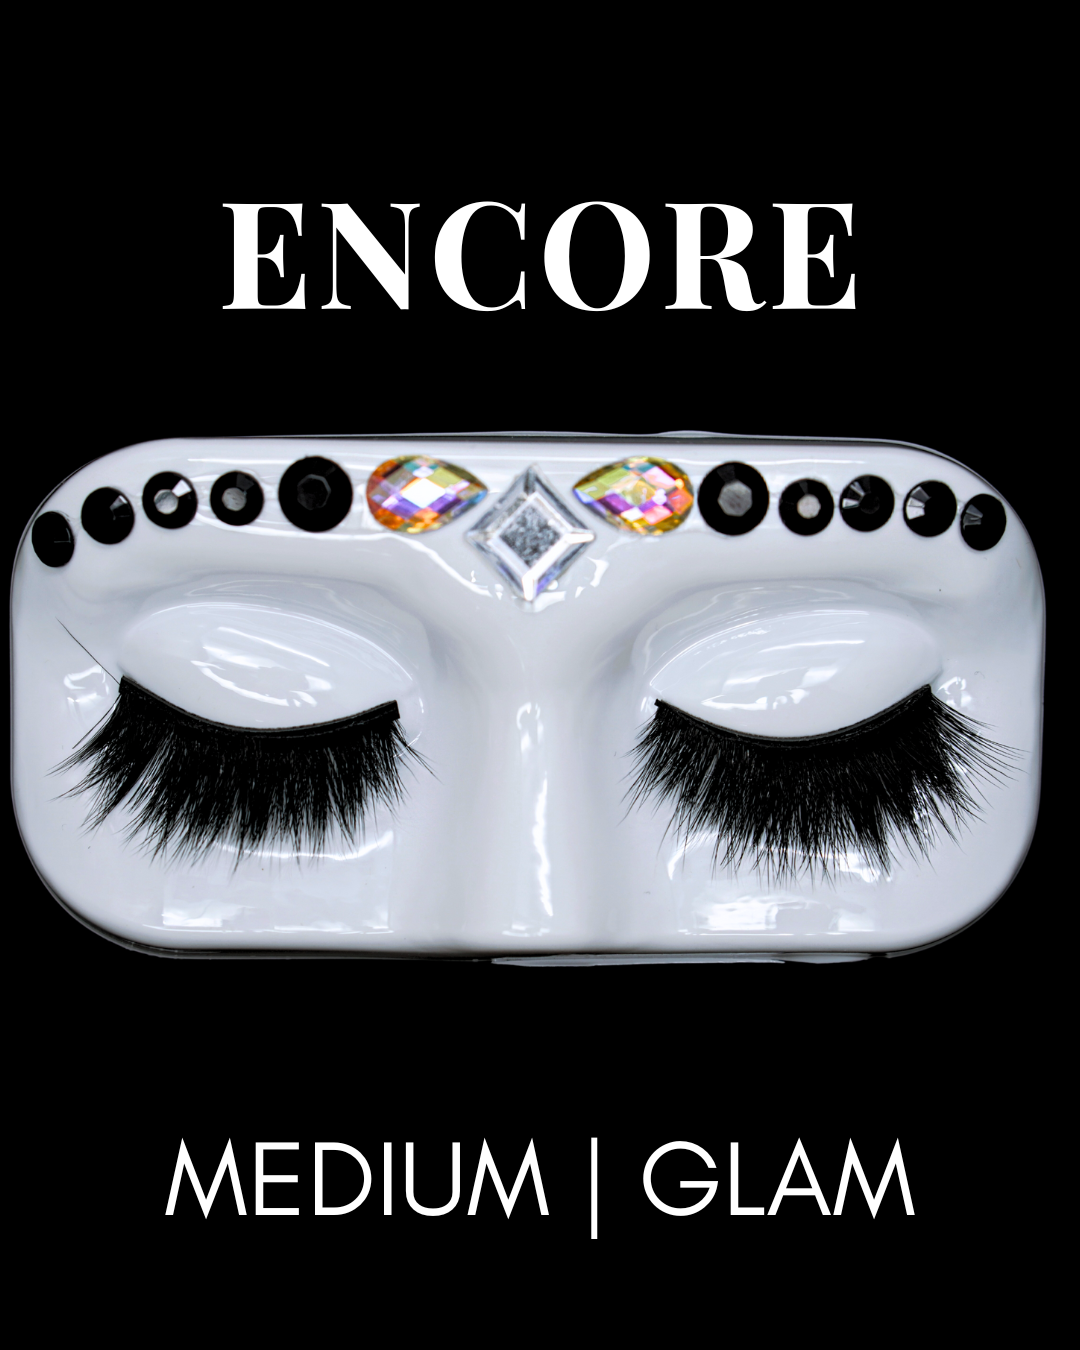 GEM IN EYE Cosmetics Lash &amp; Flash™ Magnetic Eyelashes kit has a pair of classy magnetic eyelashes in a face tray adorned with gems. This kit comes complete package with a smudge-free, waterproof, and latex-free magnetic eyeliner in an aluminum bottle in a matte finish. It has a stainless ball inside that keeps the magnetic eyeliner fresh and long-lasting. Completing the set is an angled lash applicator for precision and hassle-free application.